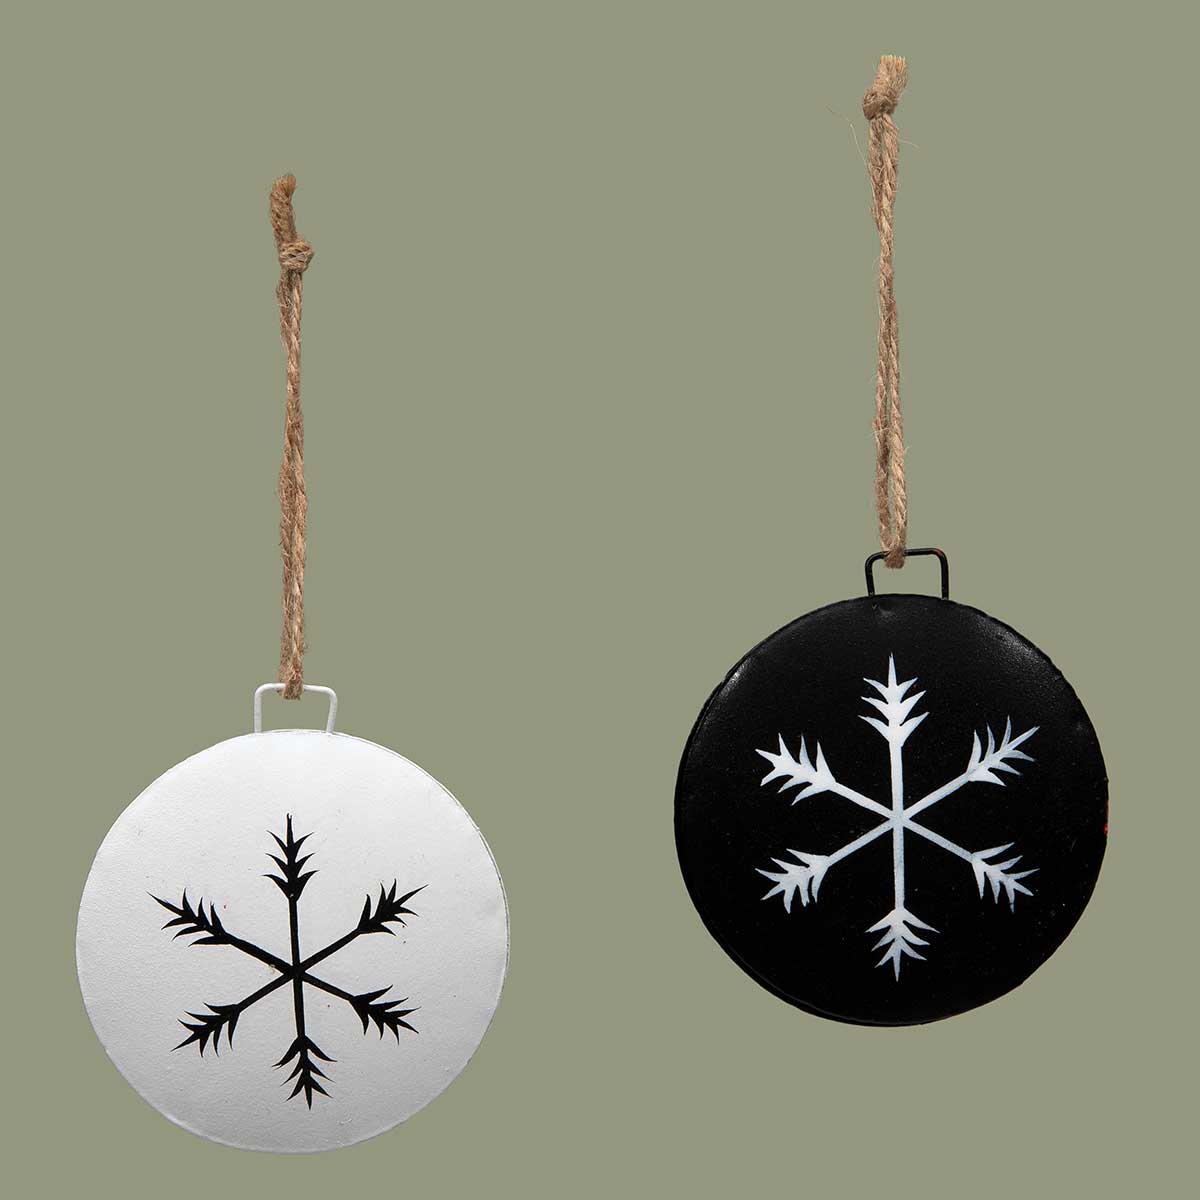 ORNAMENT ROUND 2 ASSORTED 2.75IN X .5IN X 3IN BLACK/WHITE METAL - Click Image to Close